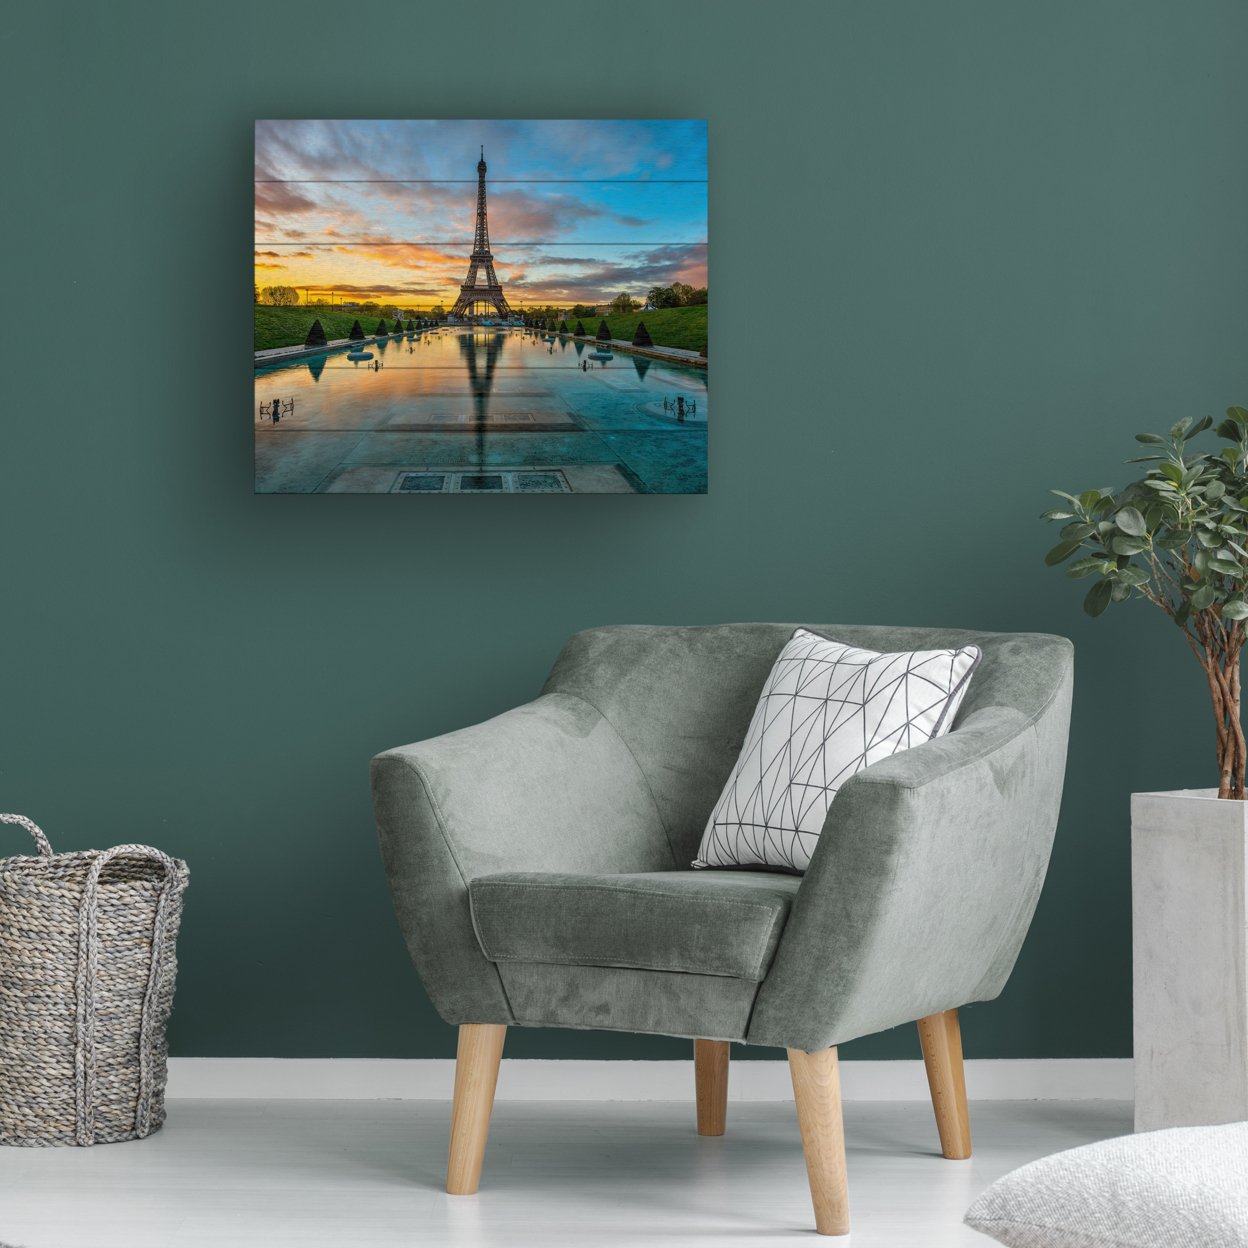 Wooden Slat Art 18 X 22 Inches Titled Sunrise In Paris Ready To Hang Home Decor Picture